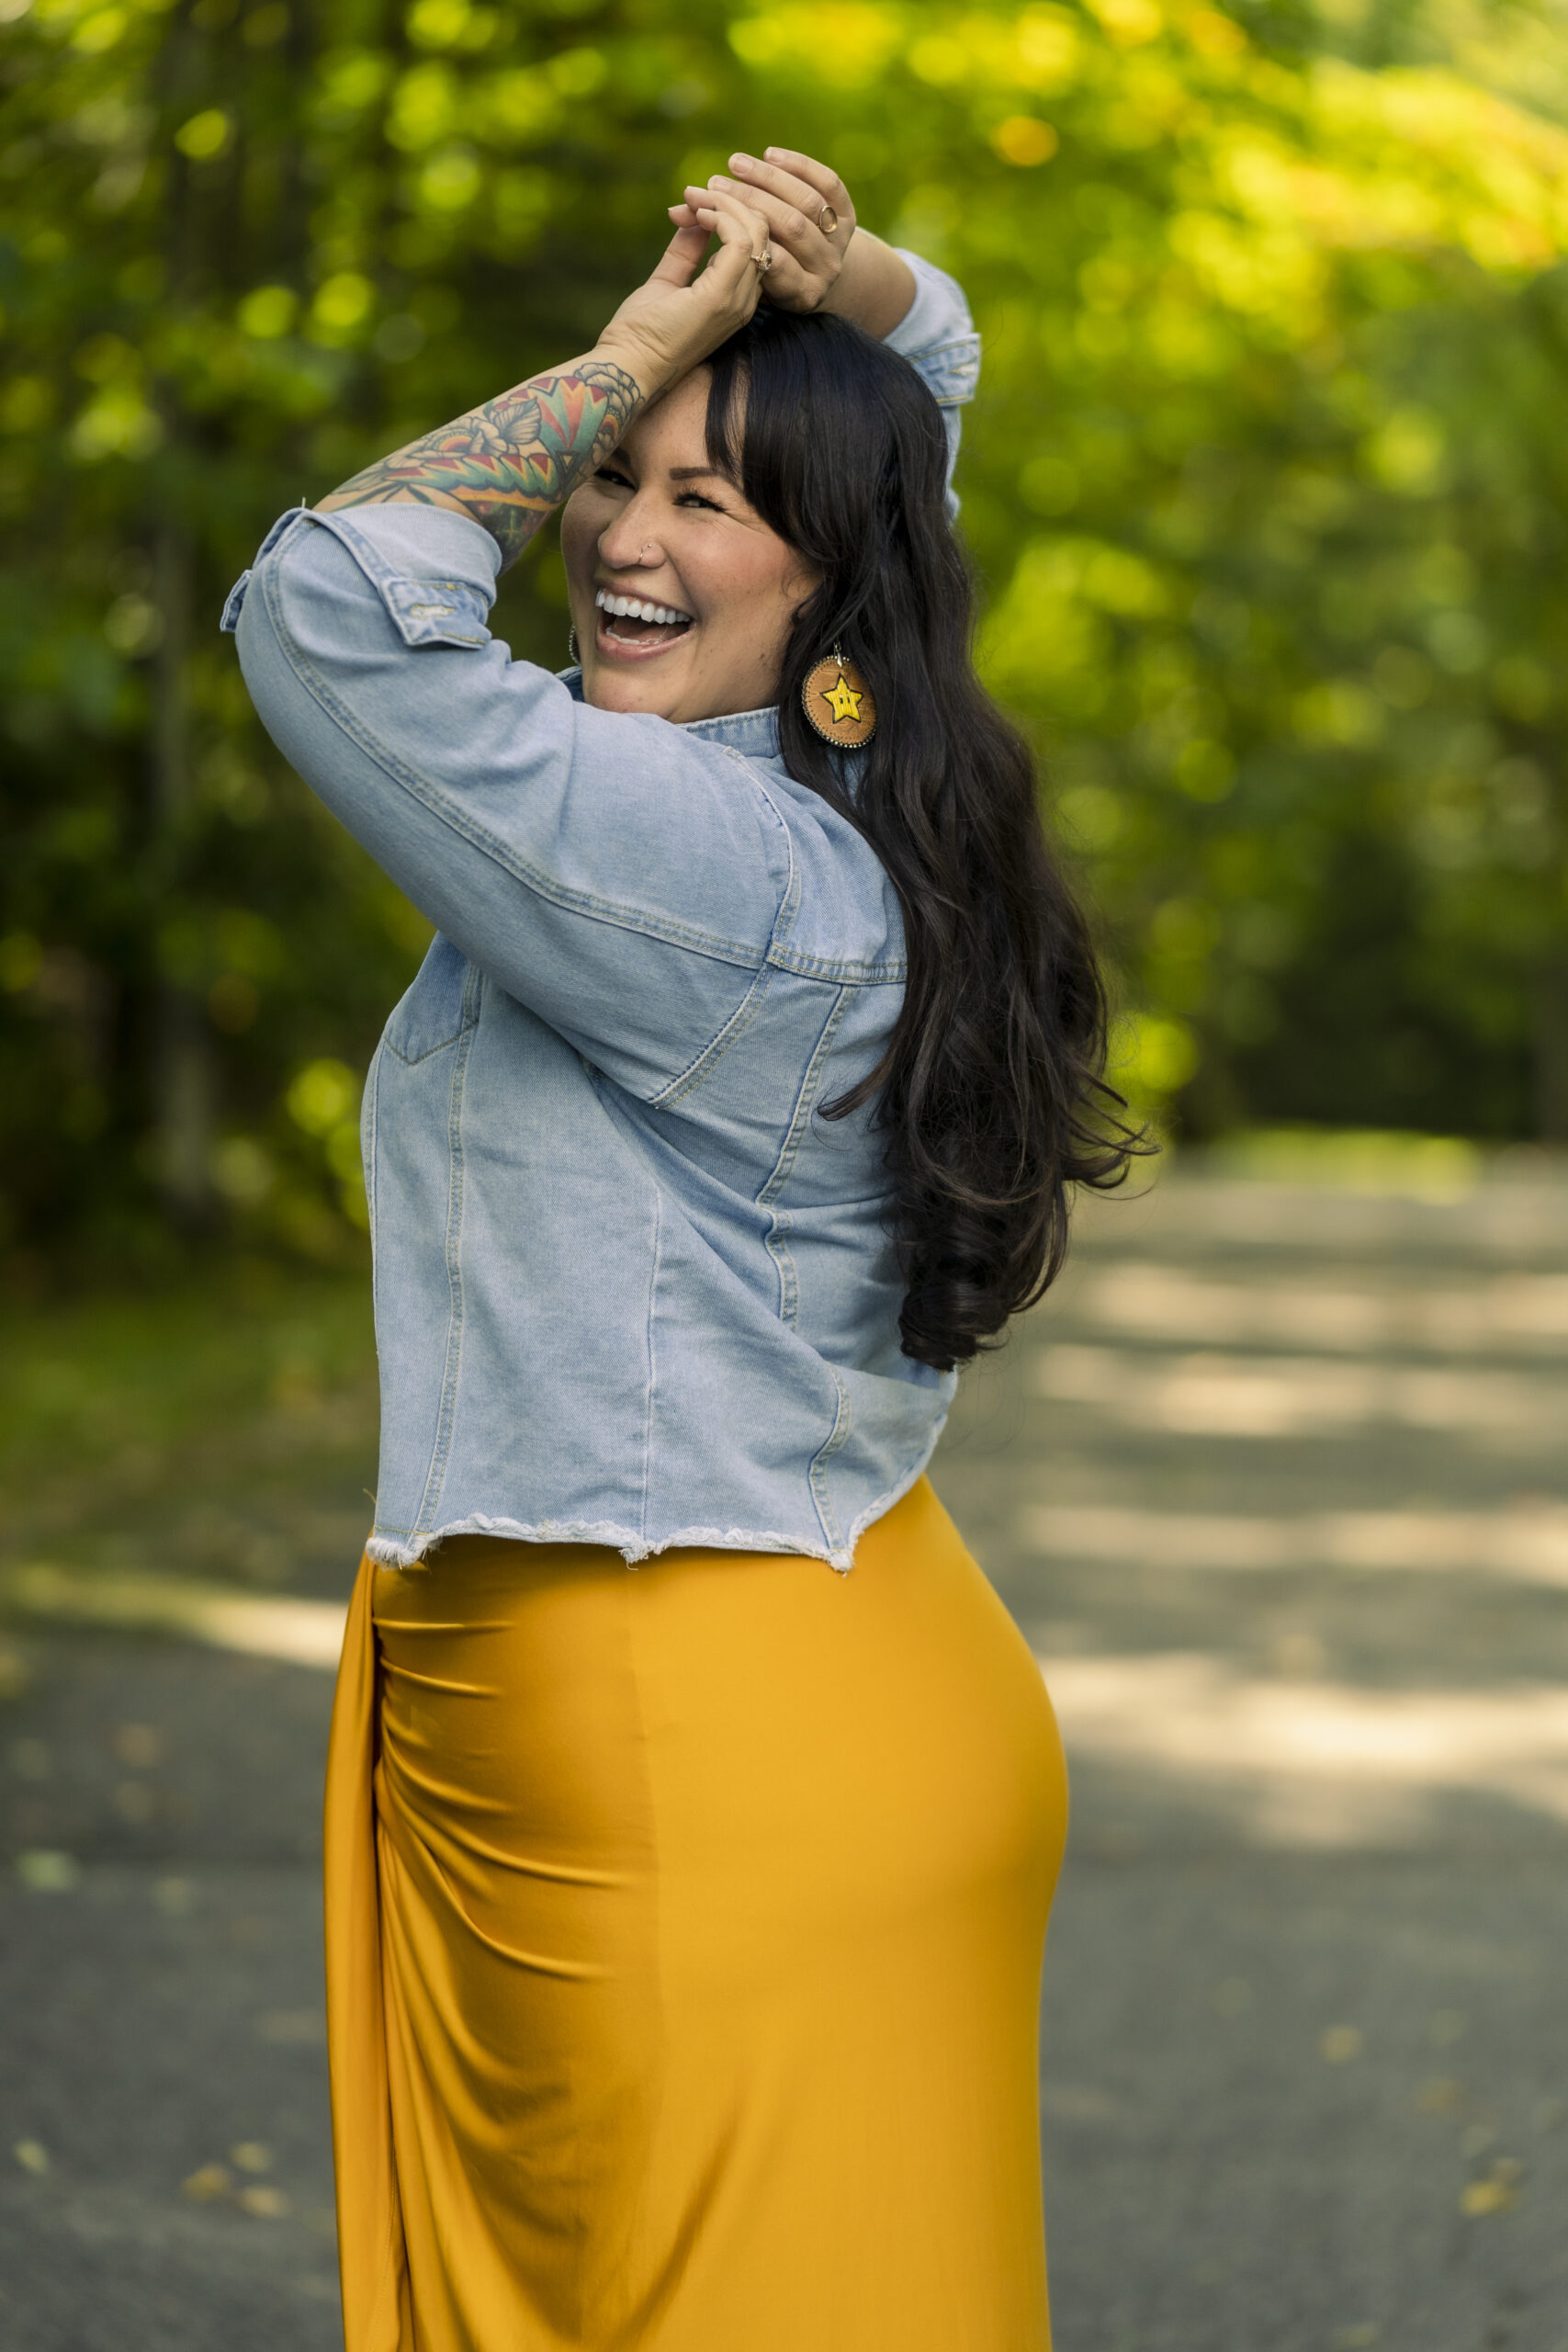 A tall woman stands sideways to the camera with her arms above her head. She is wearing a demin jacket and yellow skirt. She has long dark hair and is smiling.